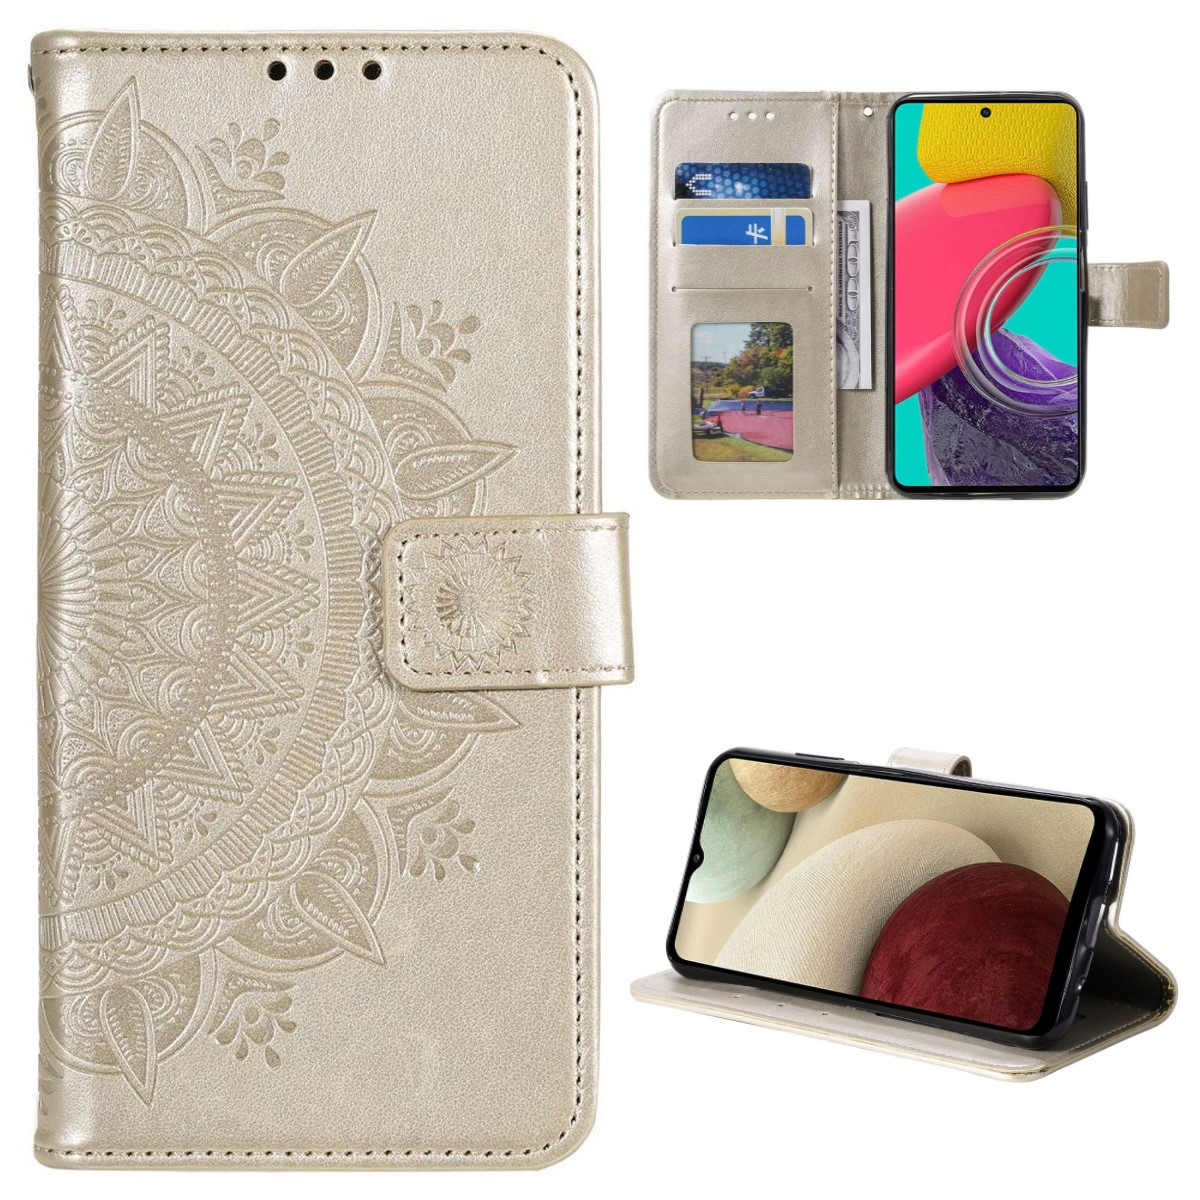 COVERKINGZ Klapphülle Samsung, Galaxy mit Gold 5G, Muster, Bookcover, M53 Mandala